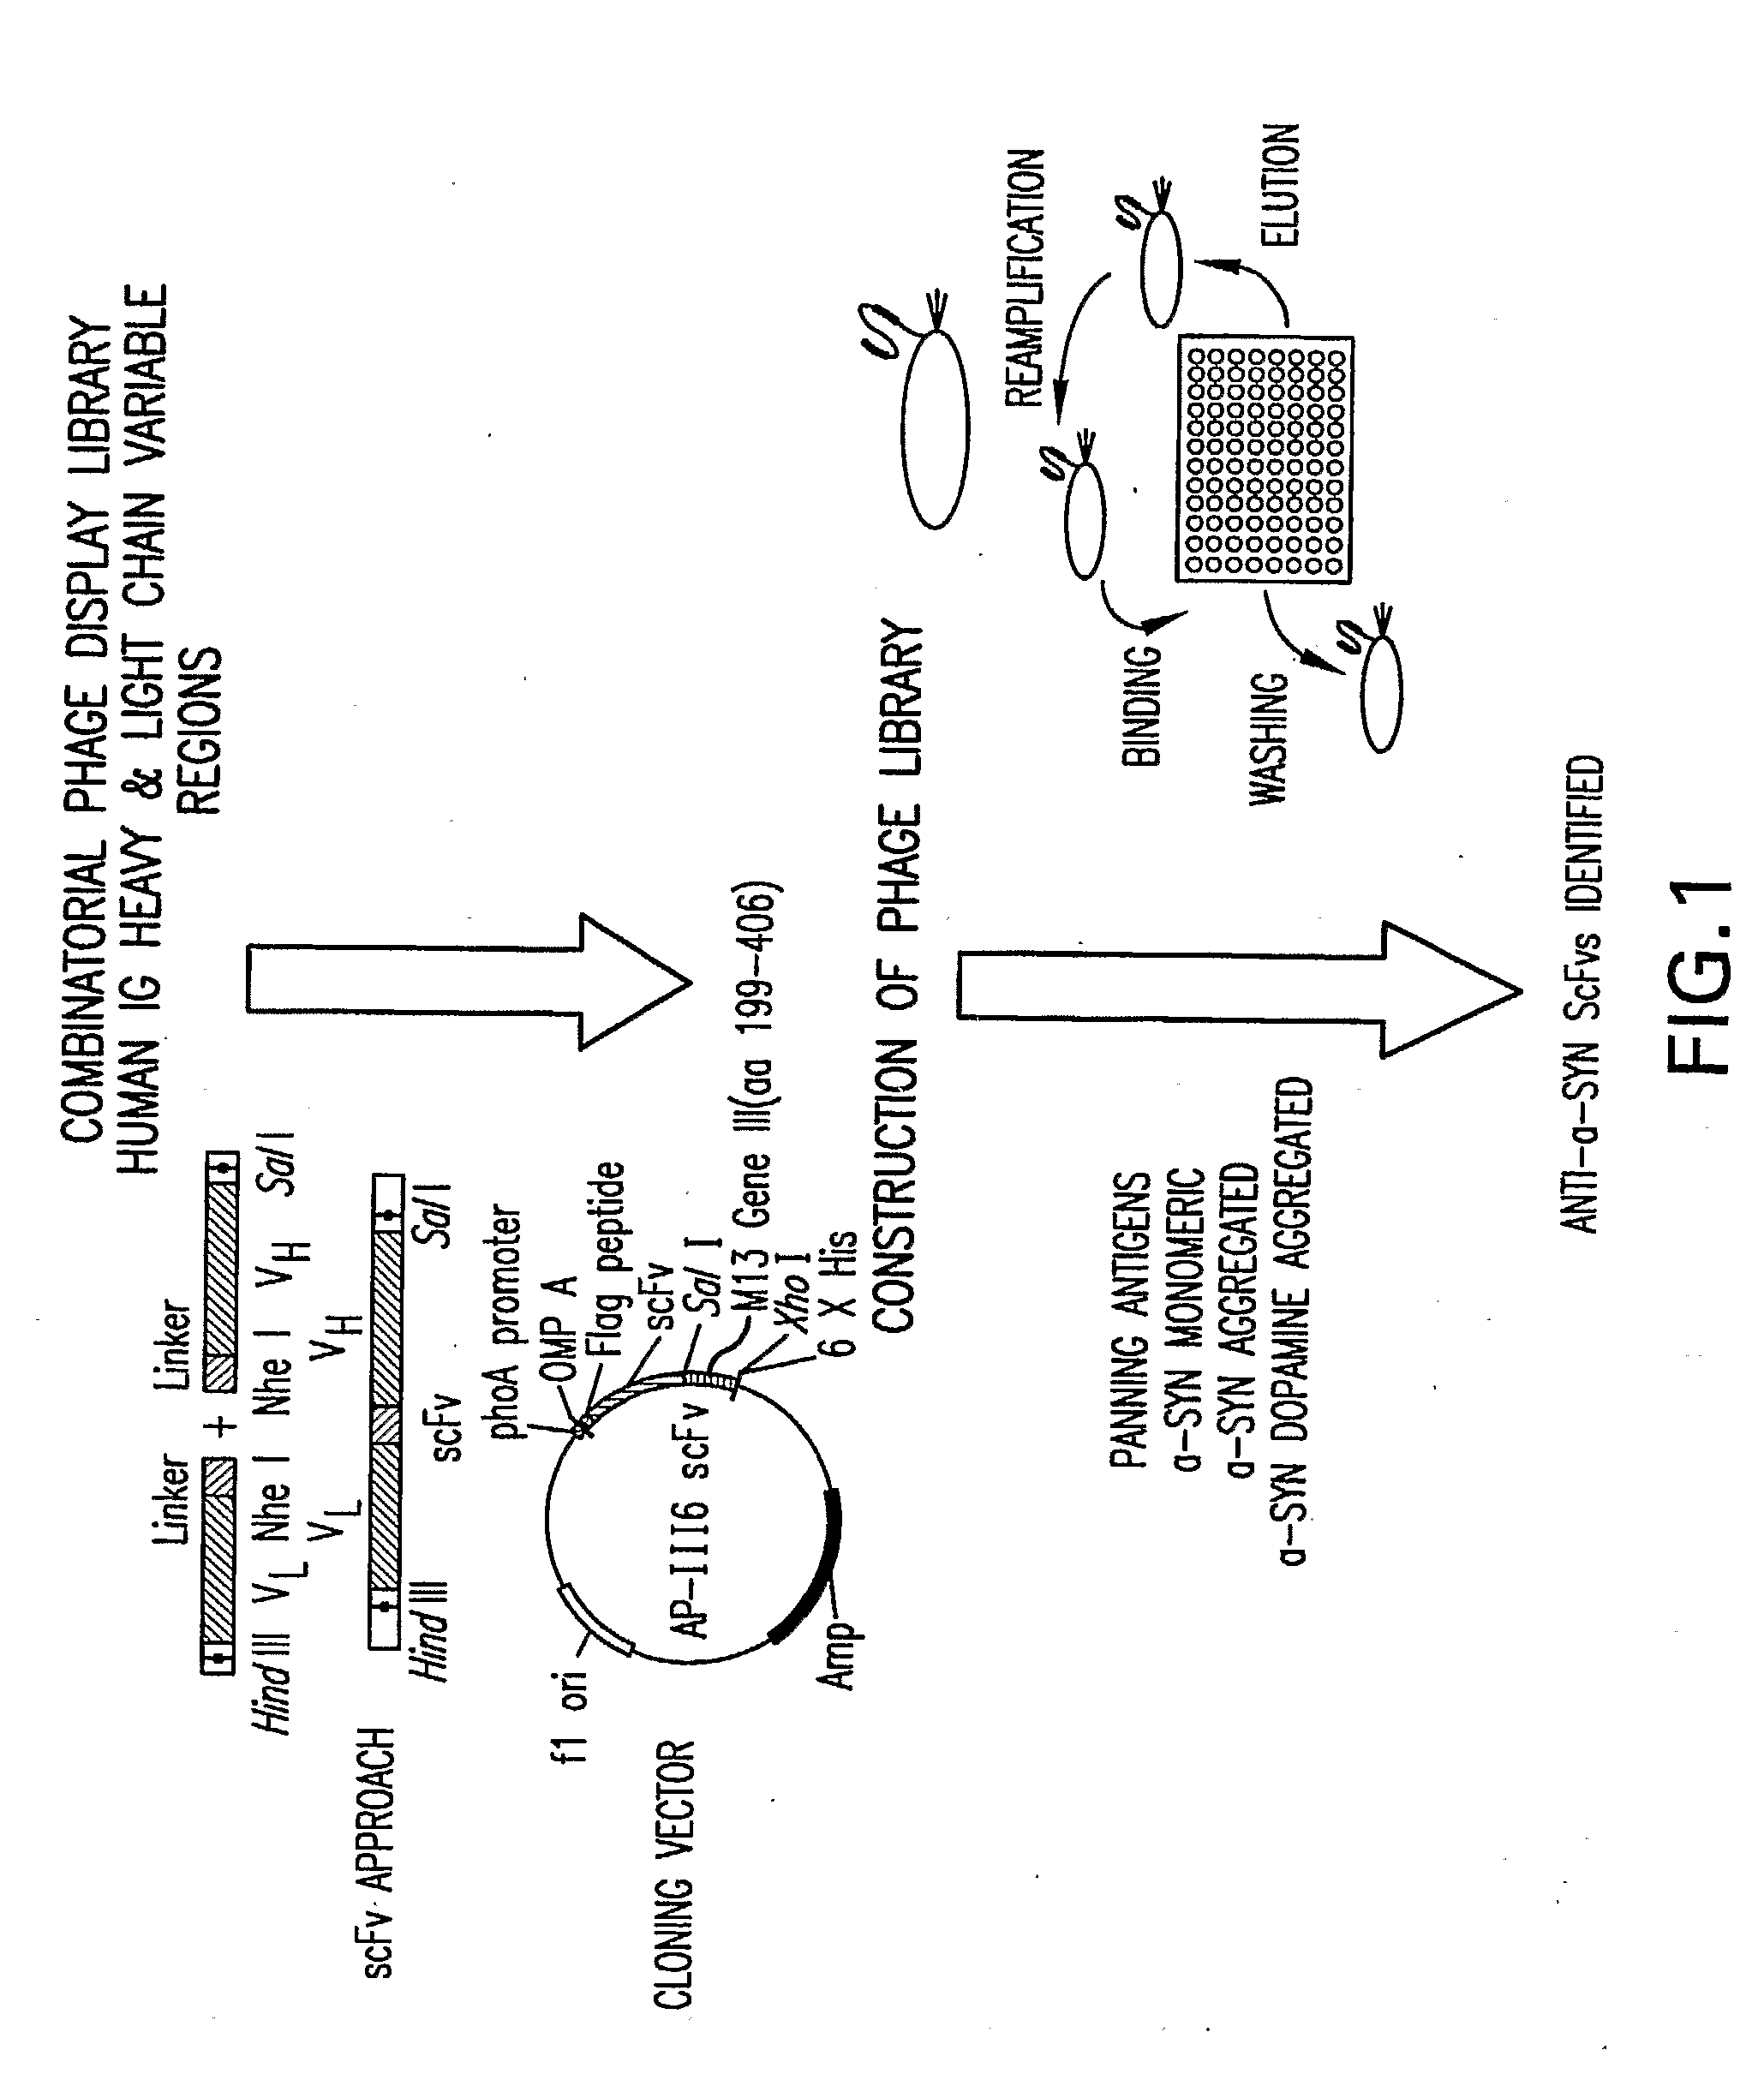 Alpha-Synuclein Antibodies and Methods Related Thereto